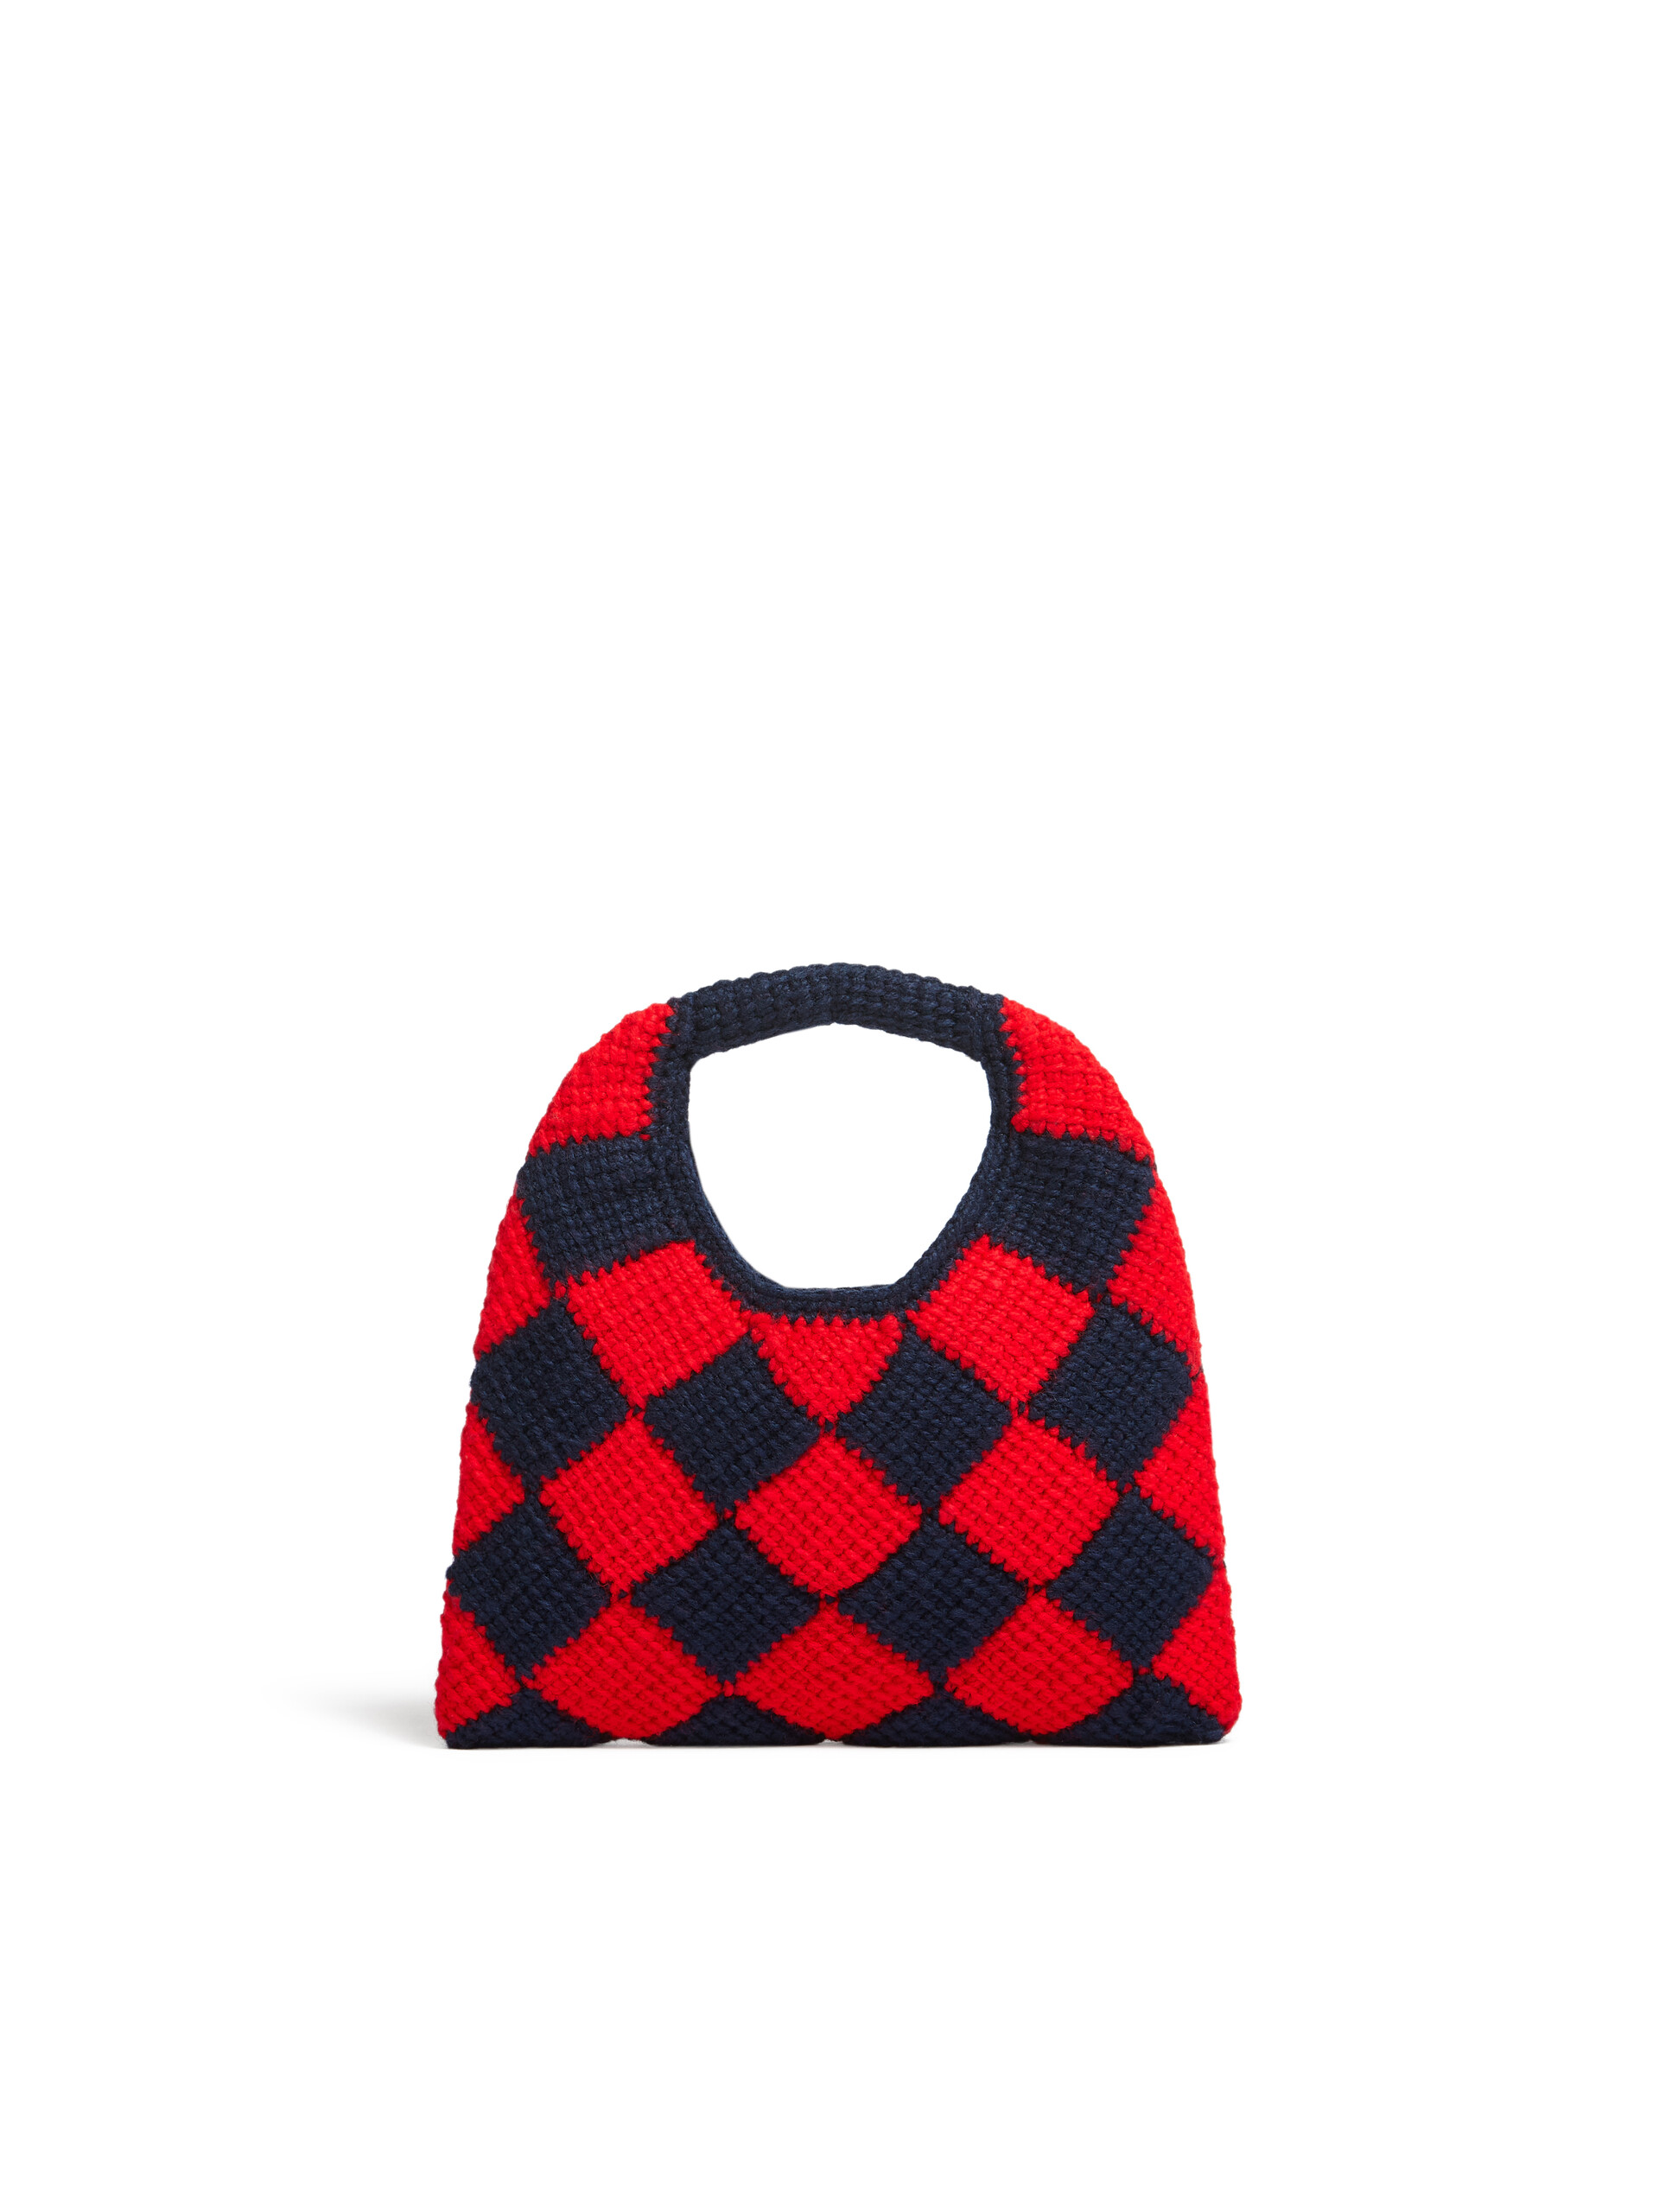 MARNI MARKET DIAMOND small bag in blue and red tech wool - Shopping Bags - Image 3